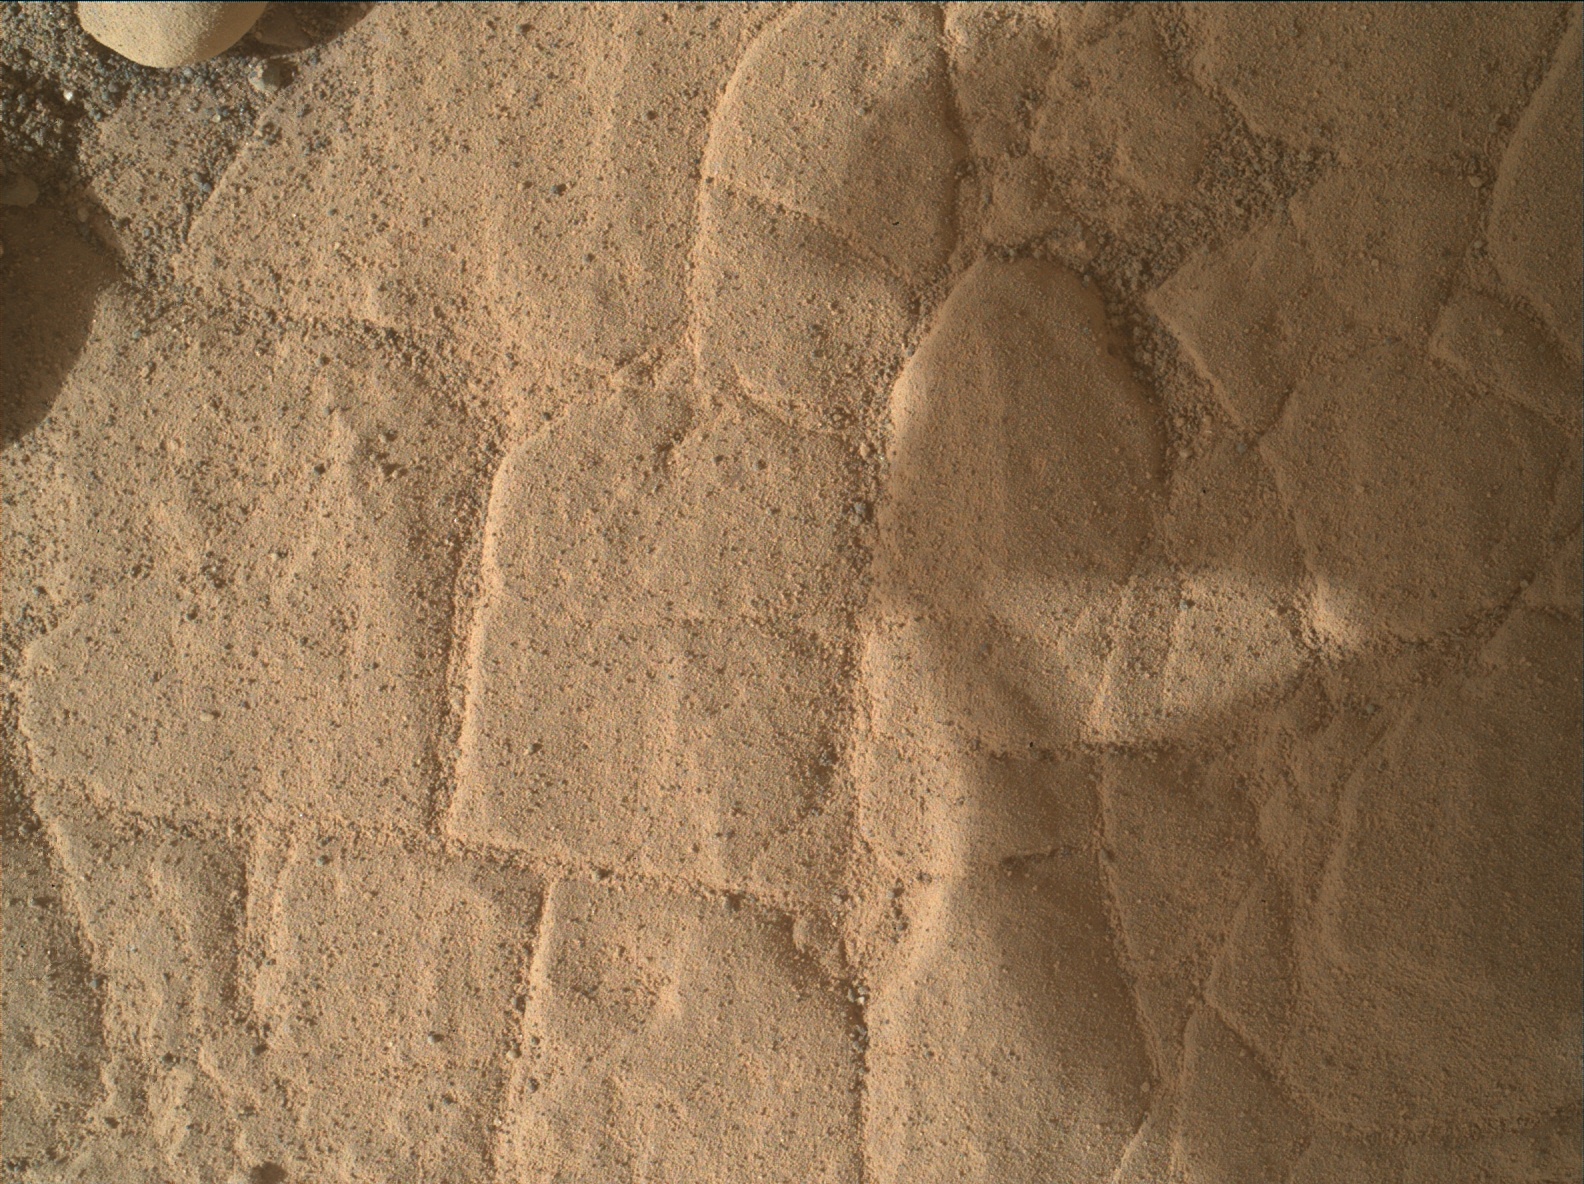 Nasa's Mars rover Curiosity acquired this image using its Mars Hand Lens Imager (MAHLI) on Sol 2480